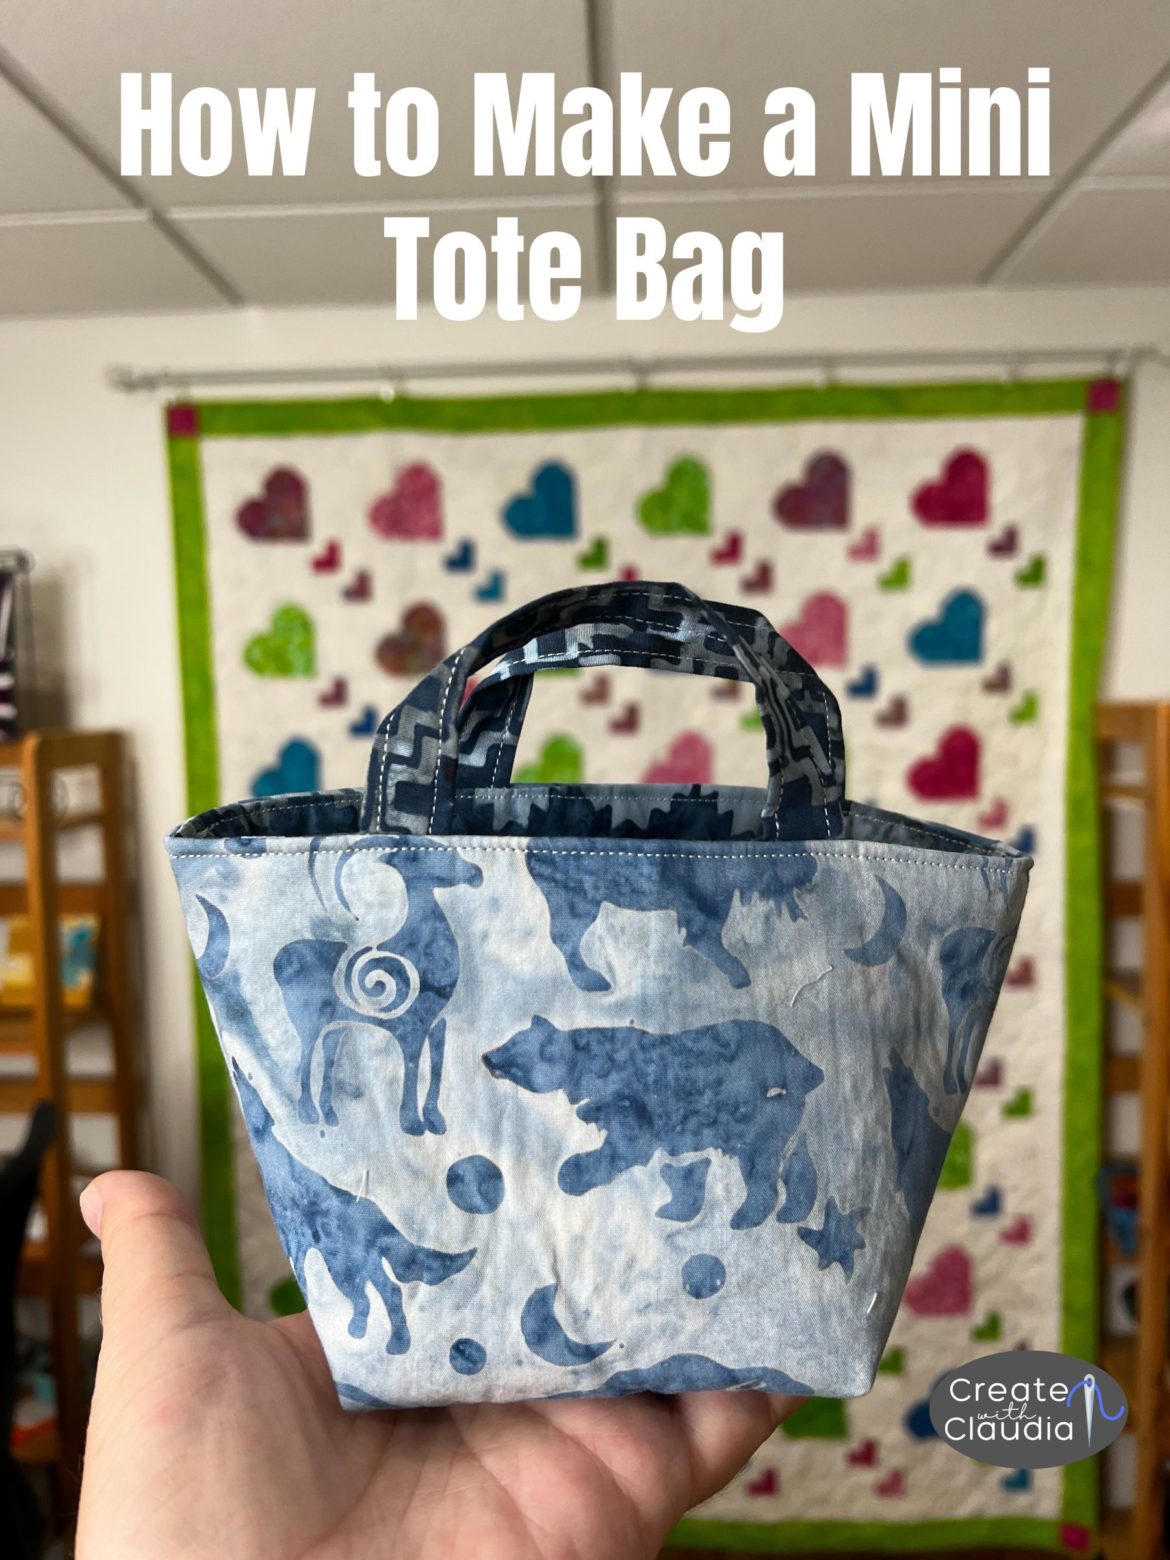 Create Stylish DIY Tote Bags From Recycled Materials: 8 Easy Steps - Craft  projects for every fan!